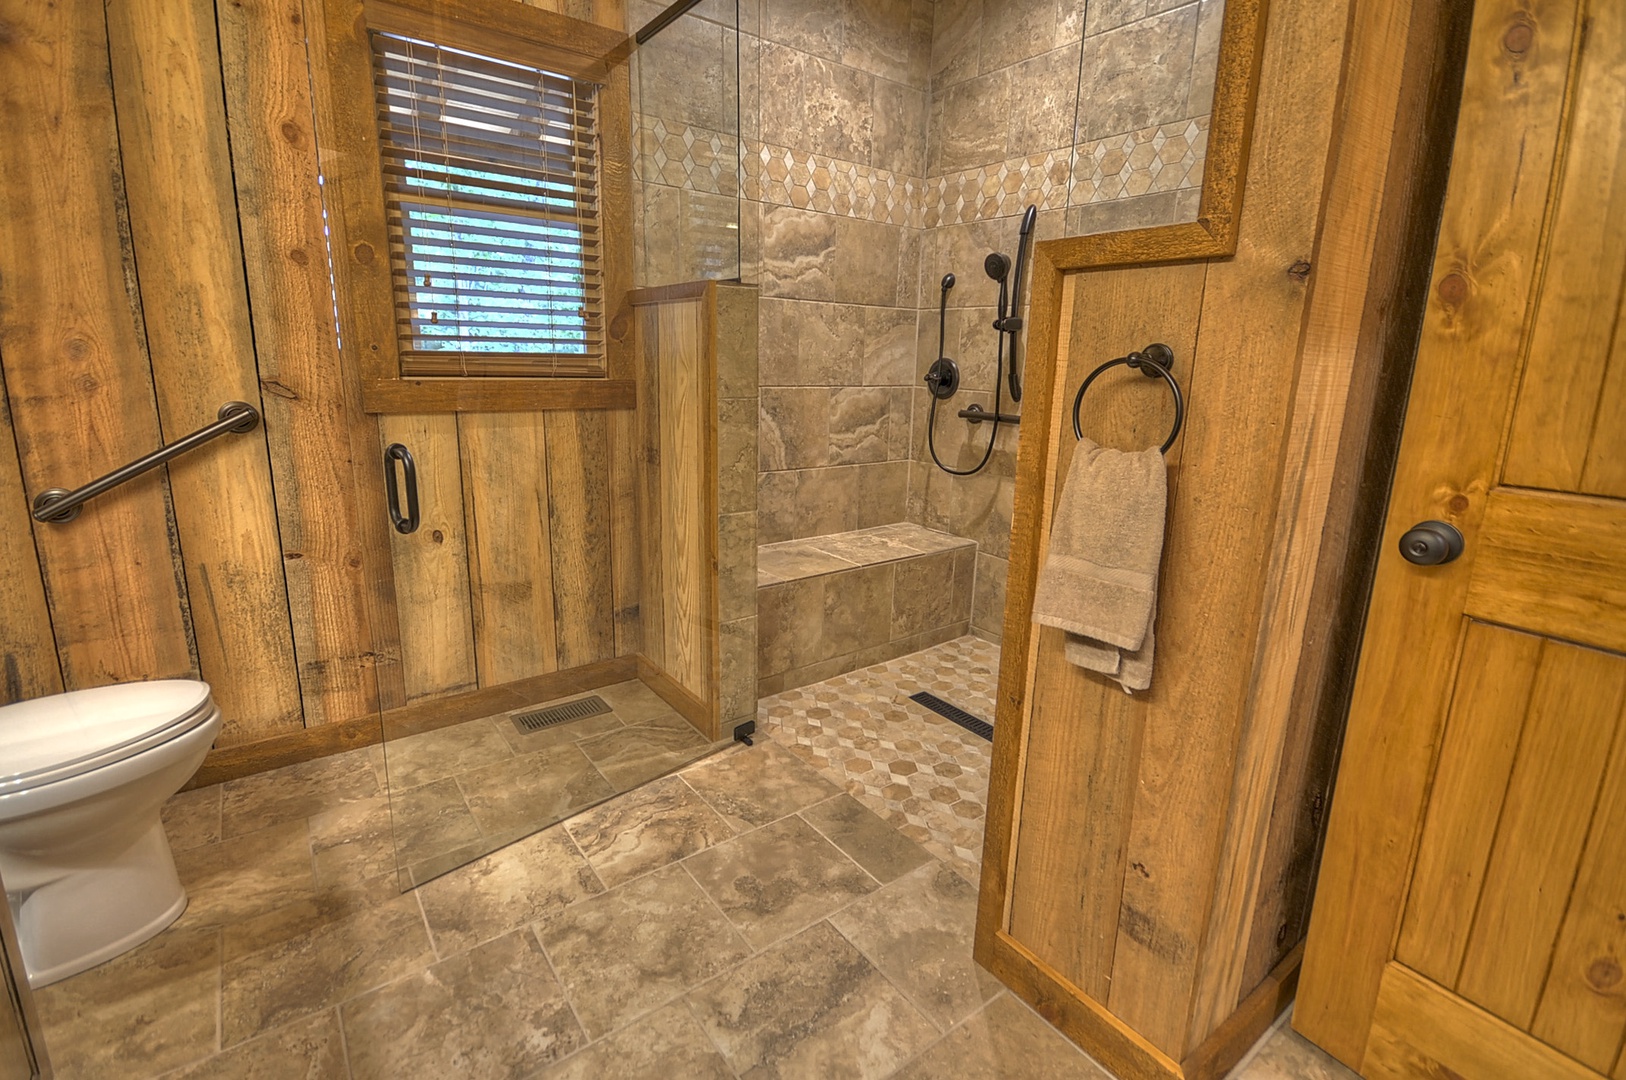 Crows Nest-Entry level shared bathroom